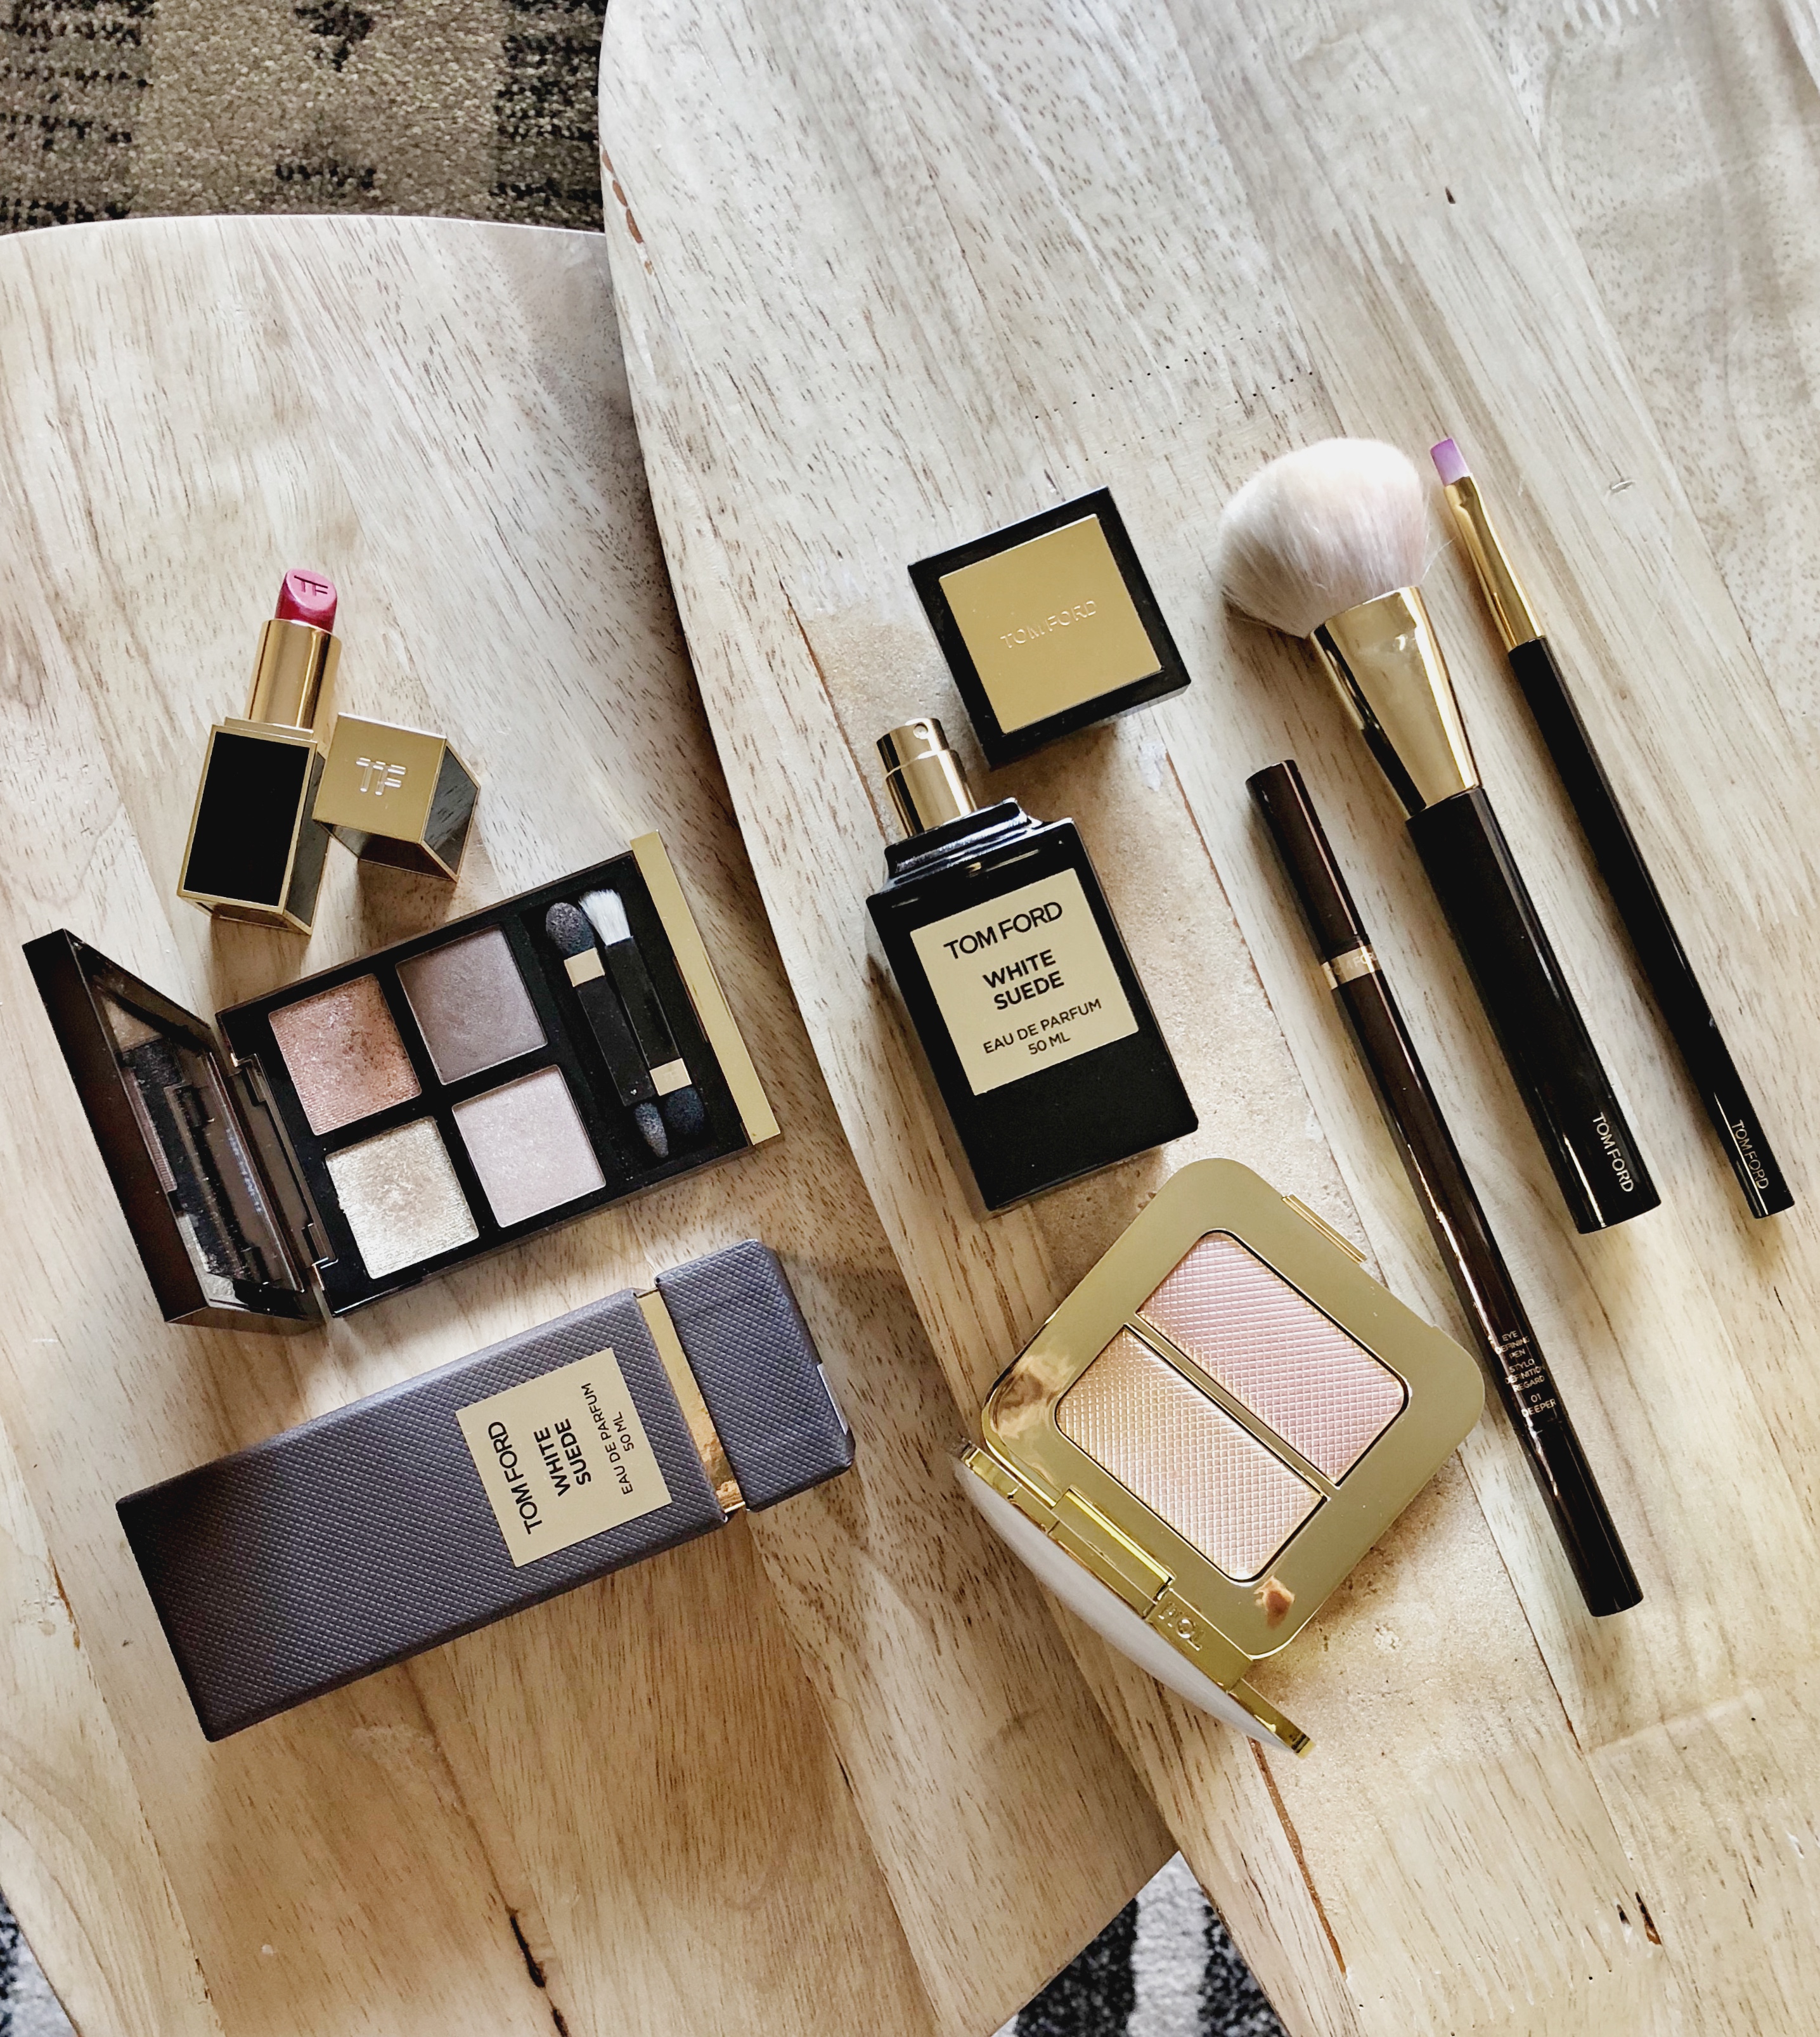 Tom Ford Beauty Now Opens In Kuala Lumpur